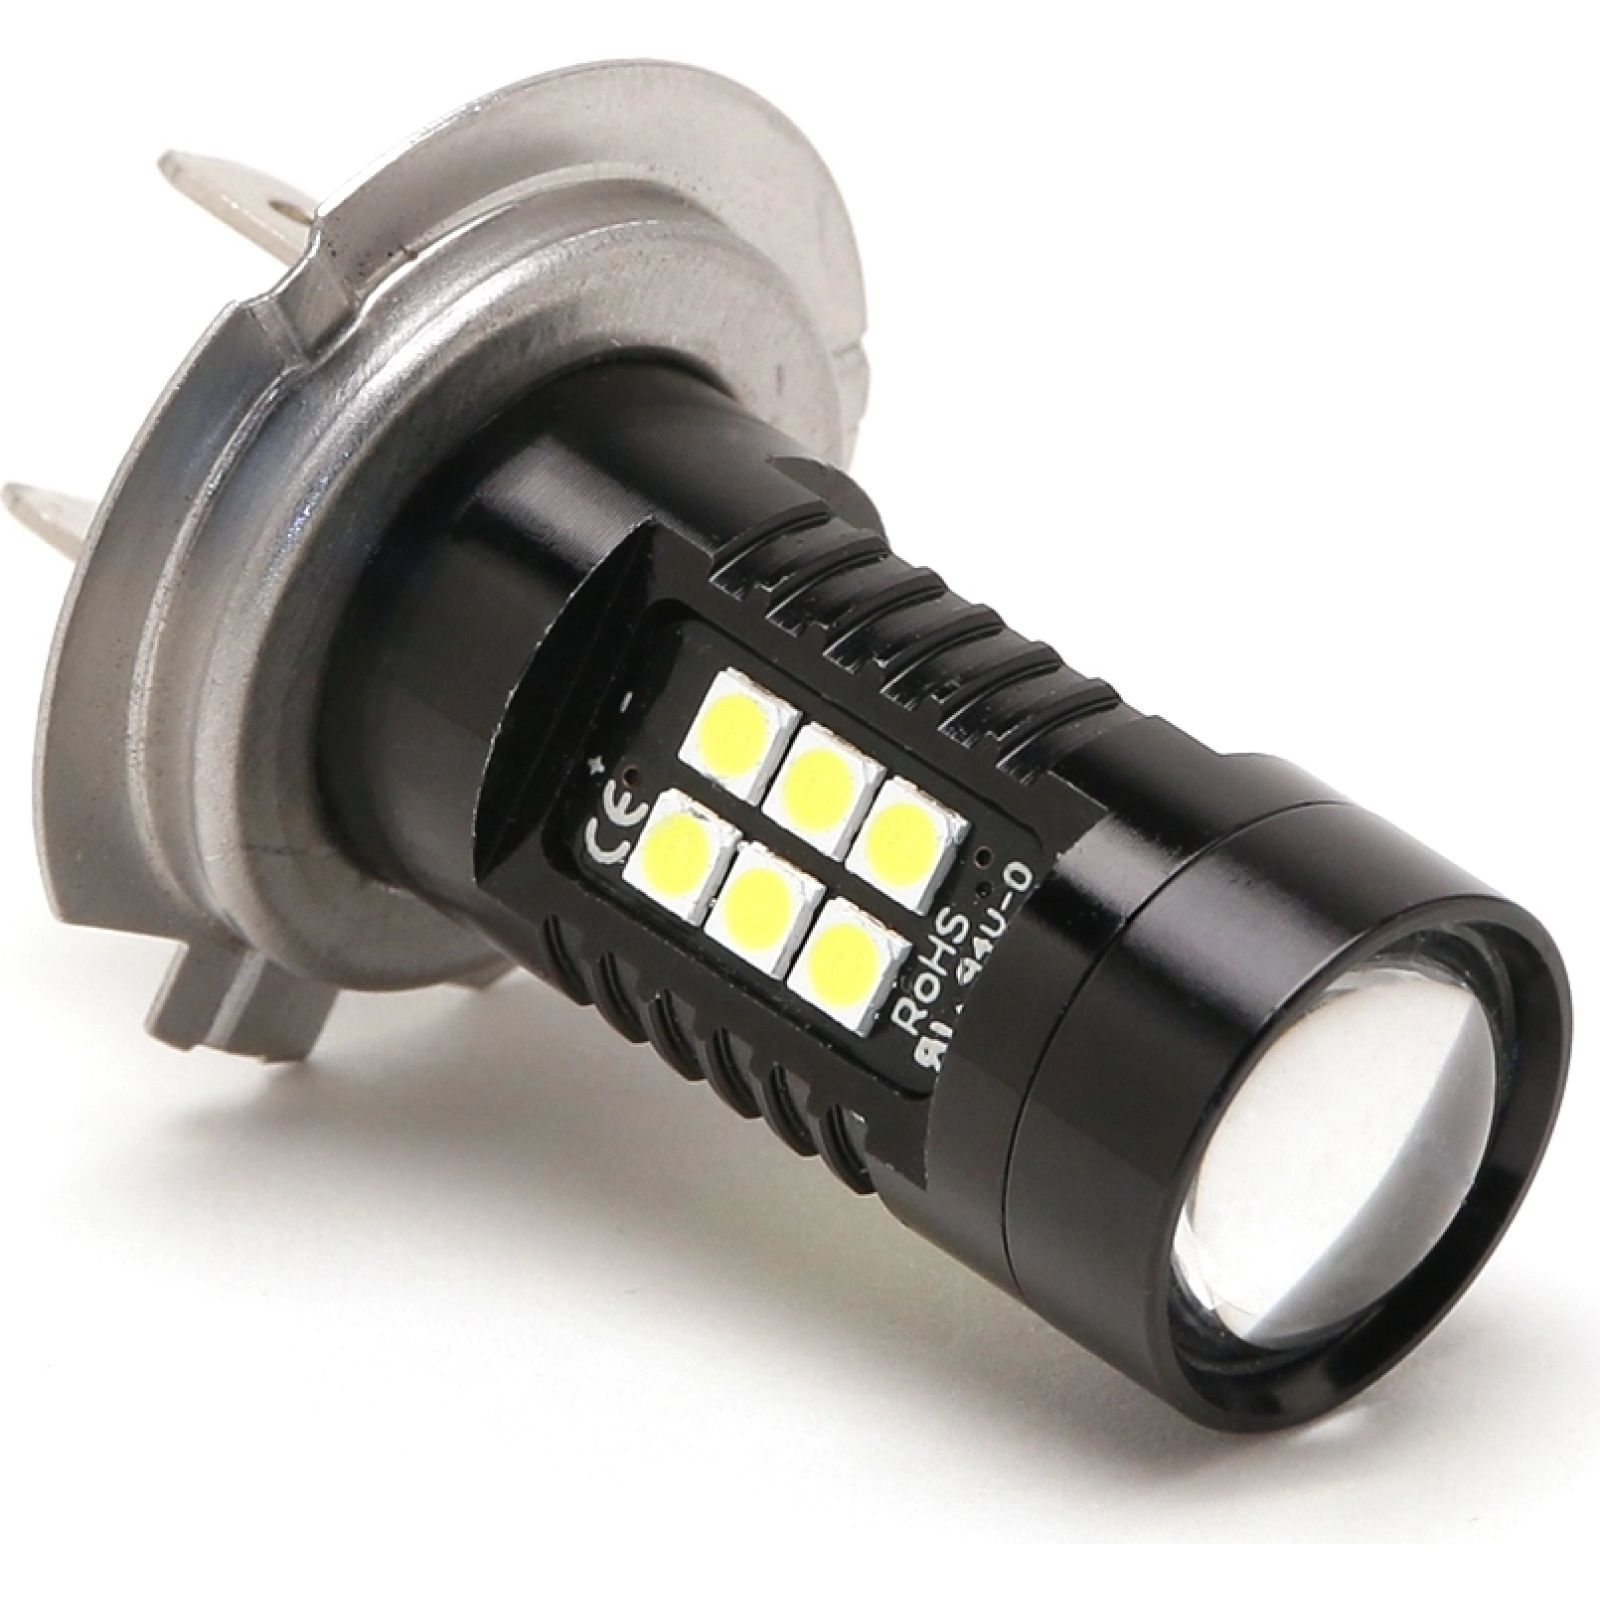 https://www.autoteile-store.at/img/product/led-nebelscheinwerfer-birne-lampe-h7-px26d-21x-2835-led-technik-weiss-al10020-327922/ea32f2e65a5027f8c097e0b72f6df190_1600.jpg